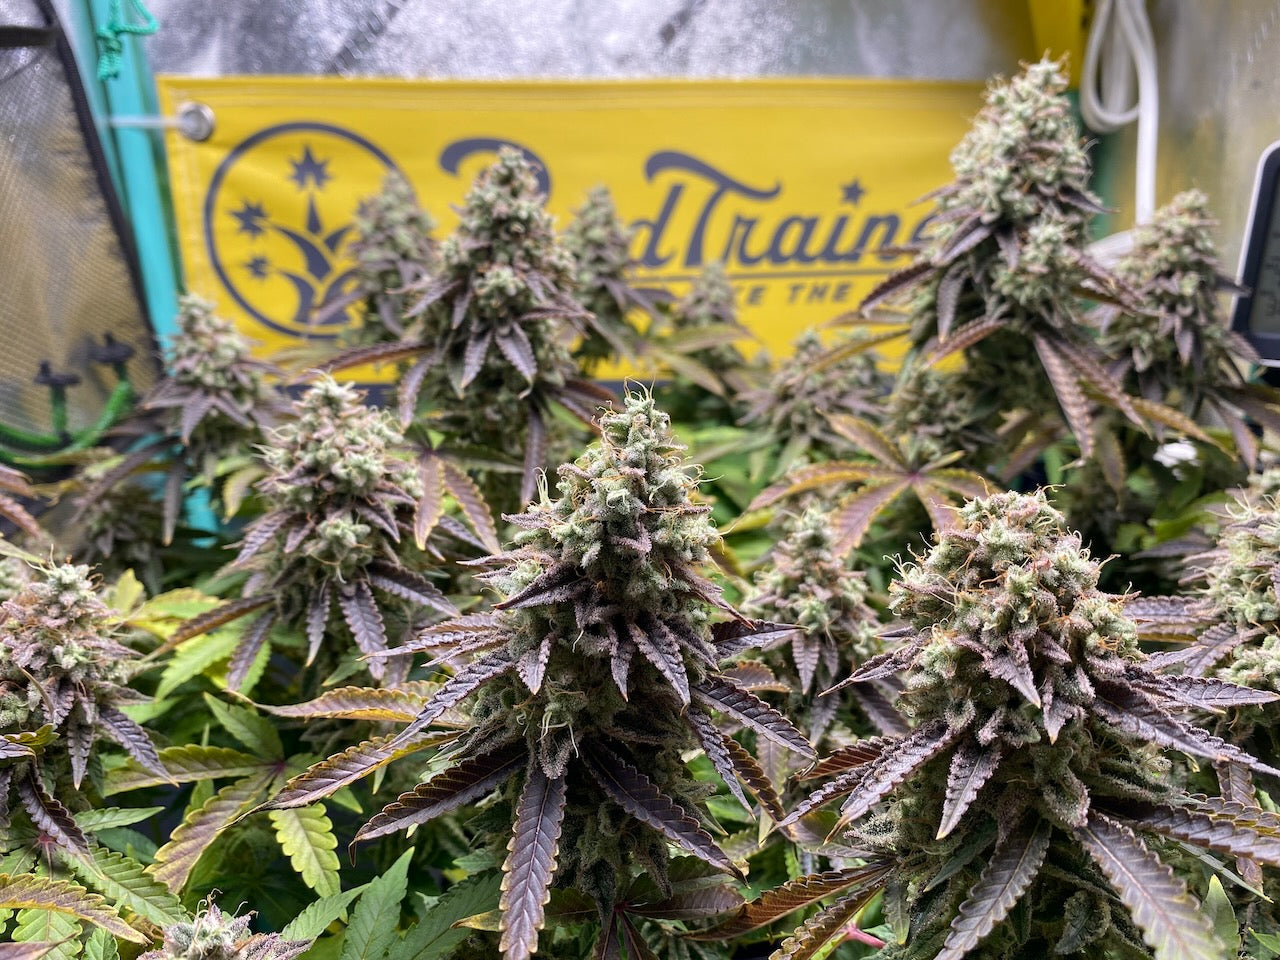 The BudTrainer Method: How to Harvest, Trim, Dry, and Cure Cannabis Plants